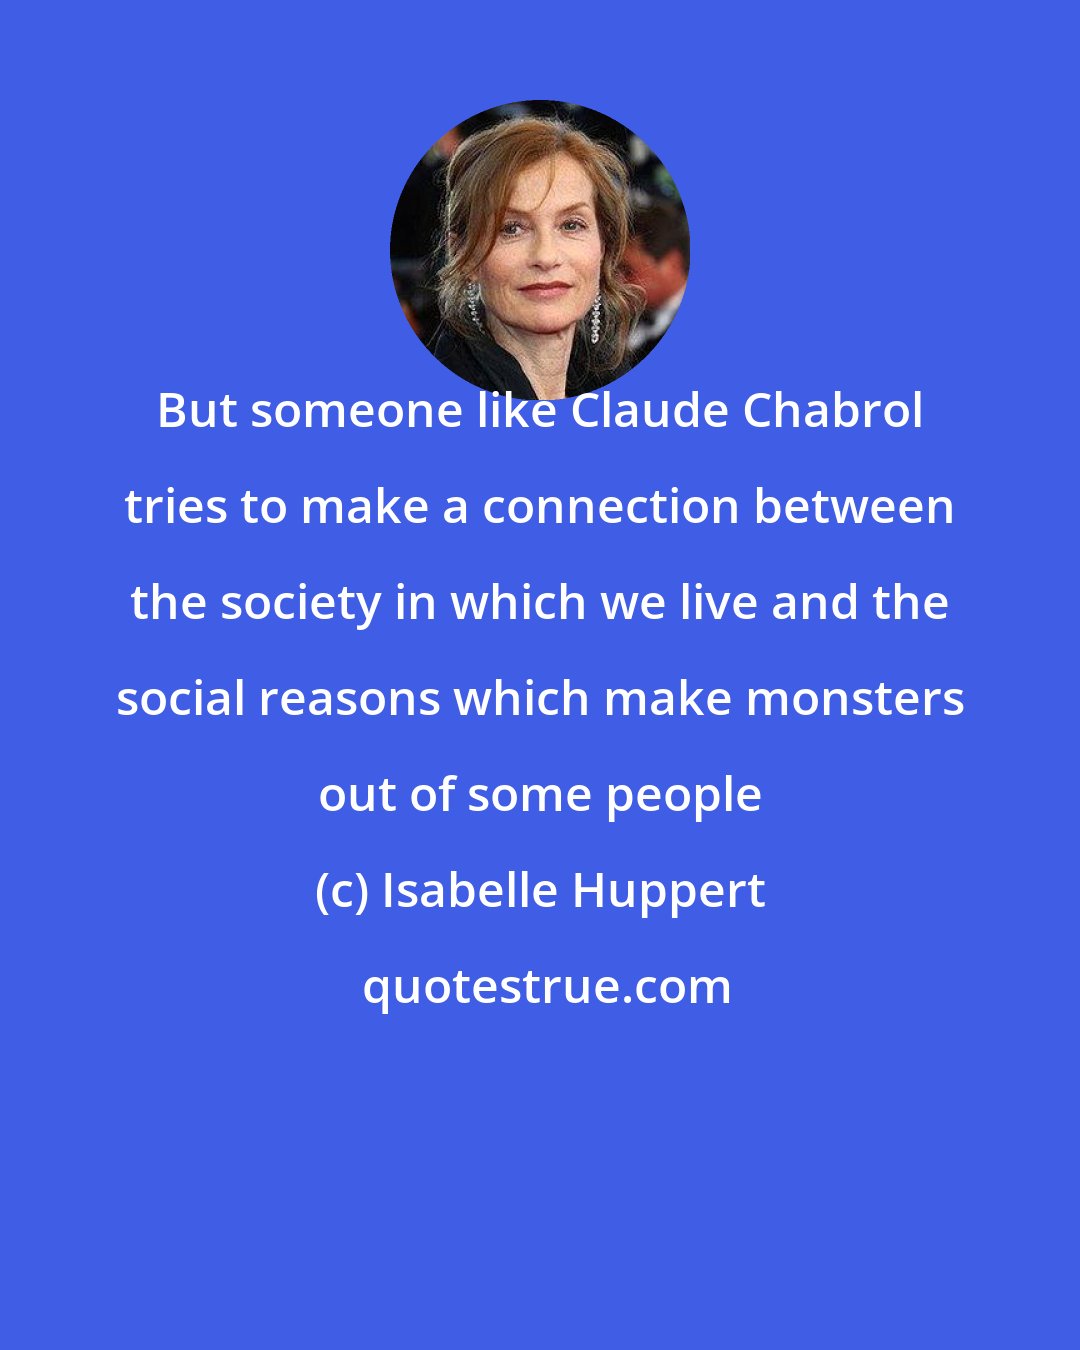 Isabelle Huppert: But someone like Claude Chabrol tries to make a connection between the society in which we live and the social reasons which make monsters out of some people